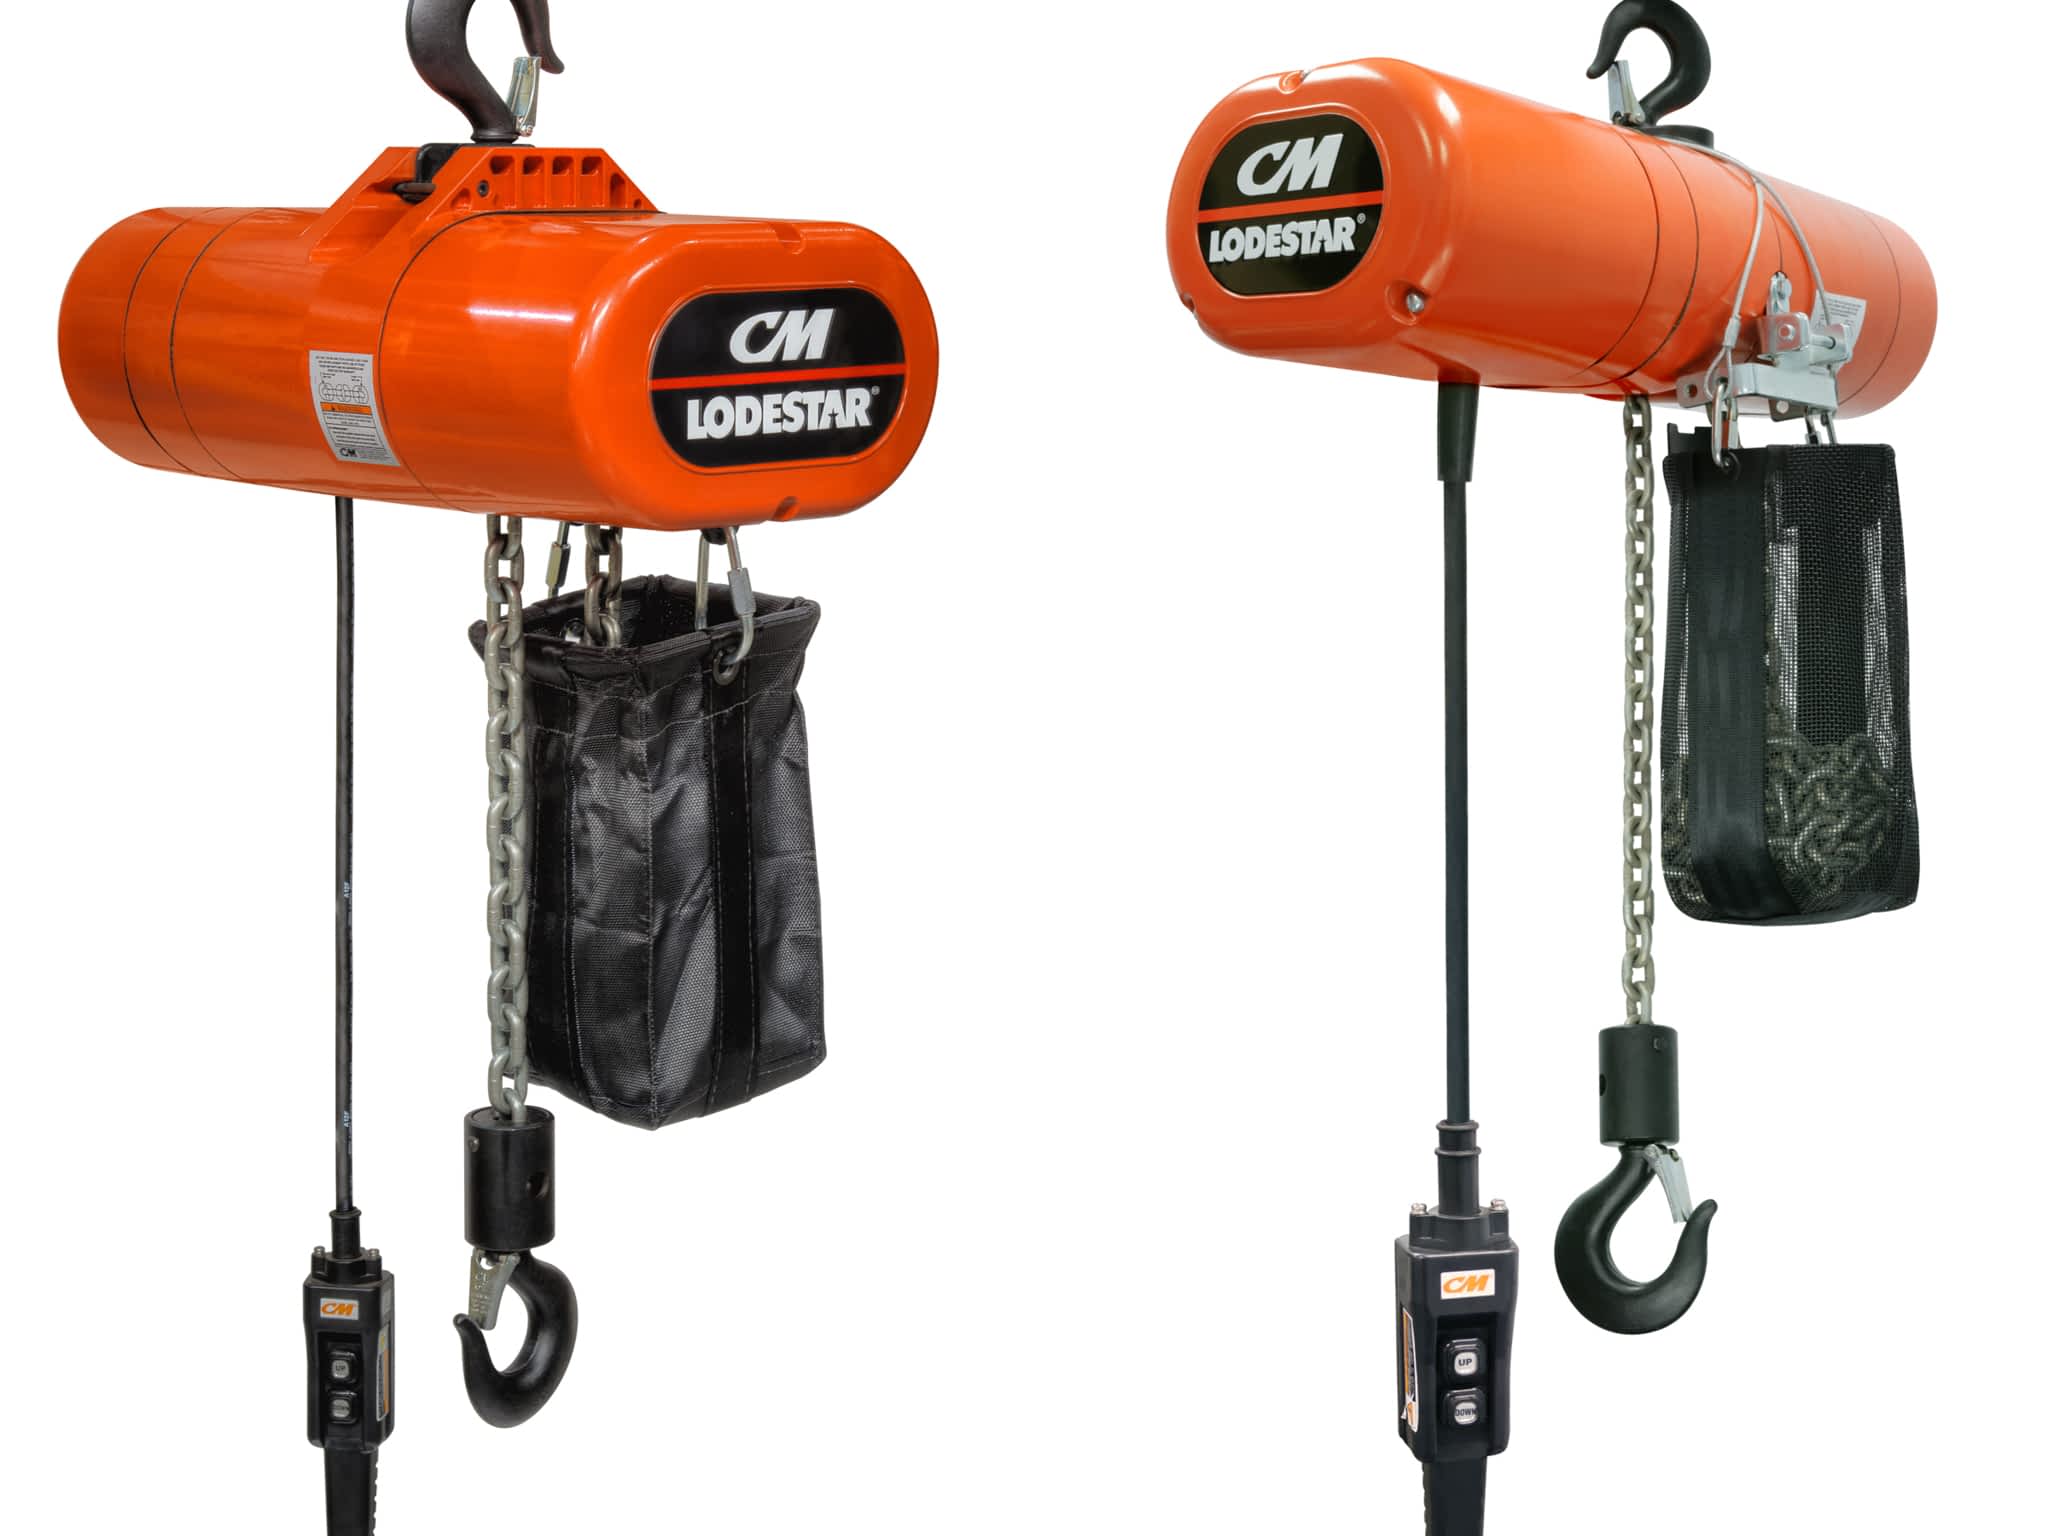 photo Engineered Lifting Systems & Equipment